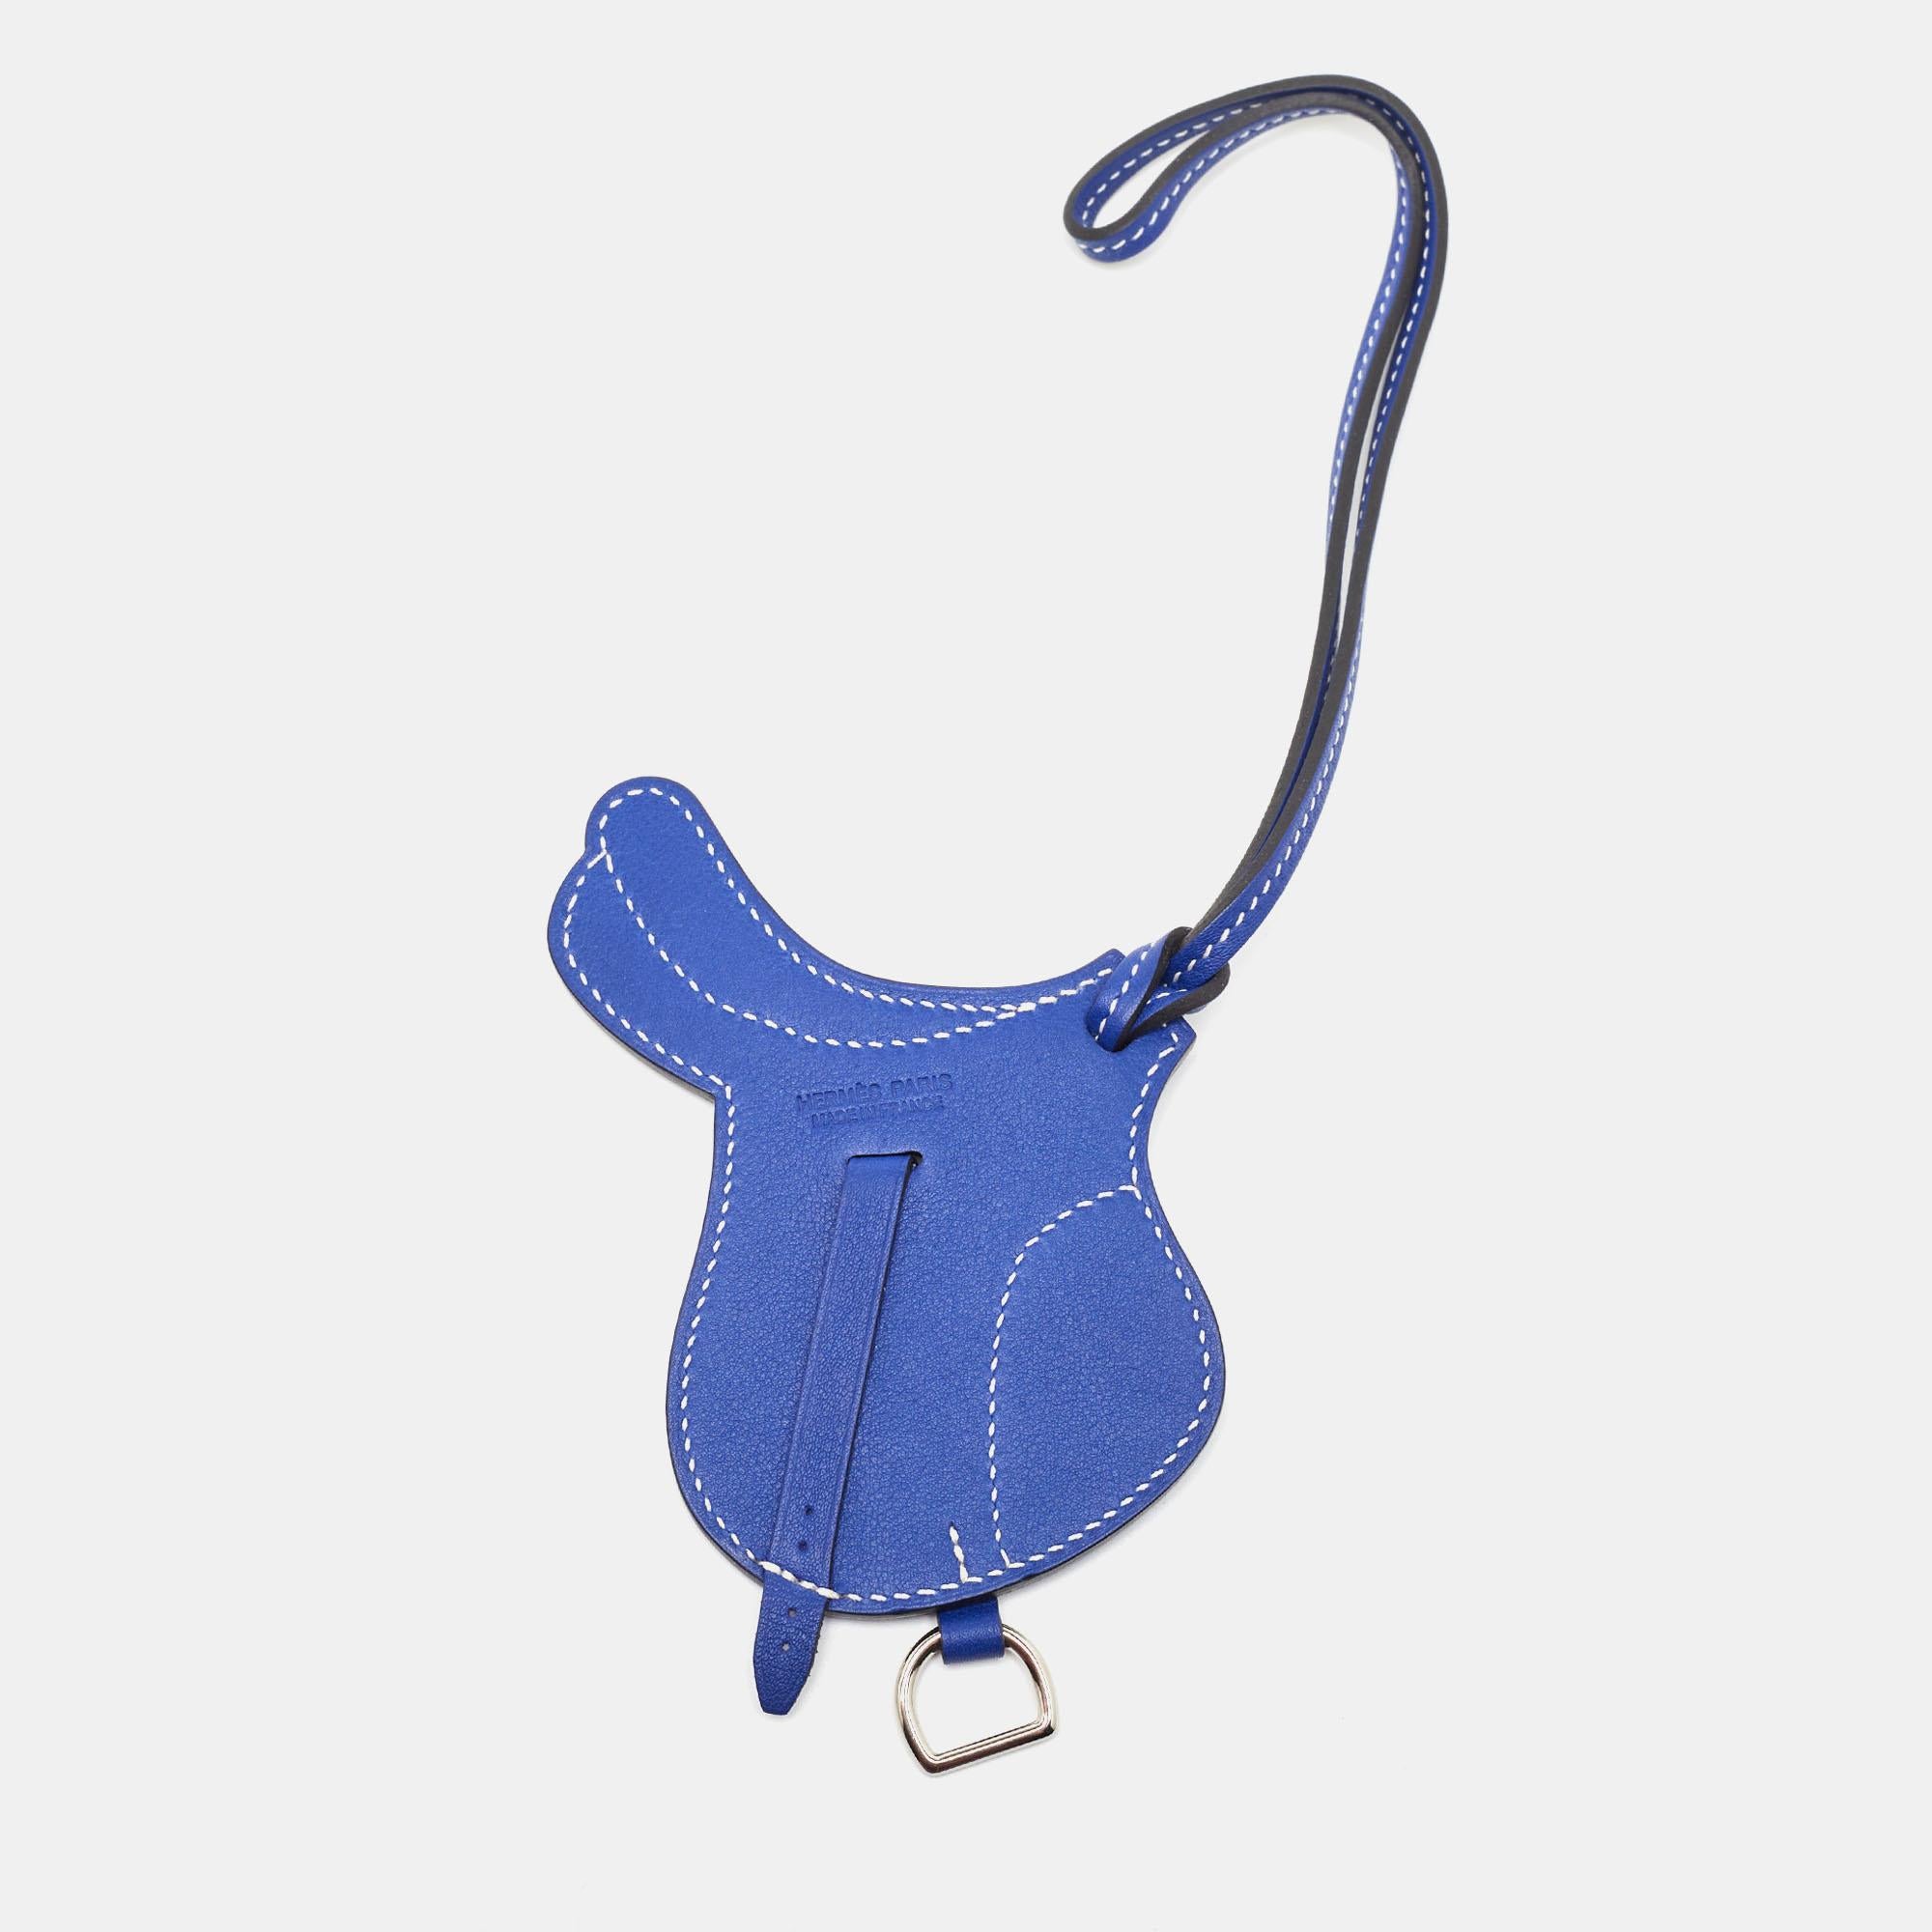 The Hermès Paddock Selle bag charm is an exquisite accessory crafted from luxurious Swift Leather. Its design features a luxe blue shade. This charming piece perfectly complements any Hermès bag, adding a touch of elegance and sophistication.

